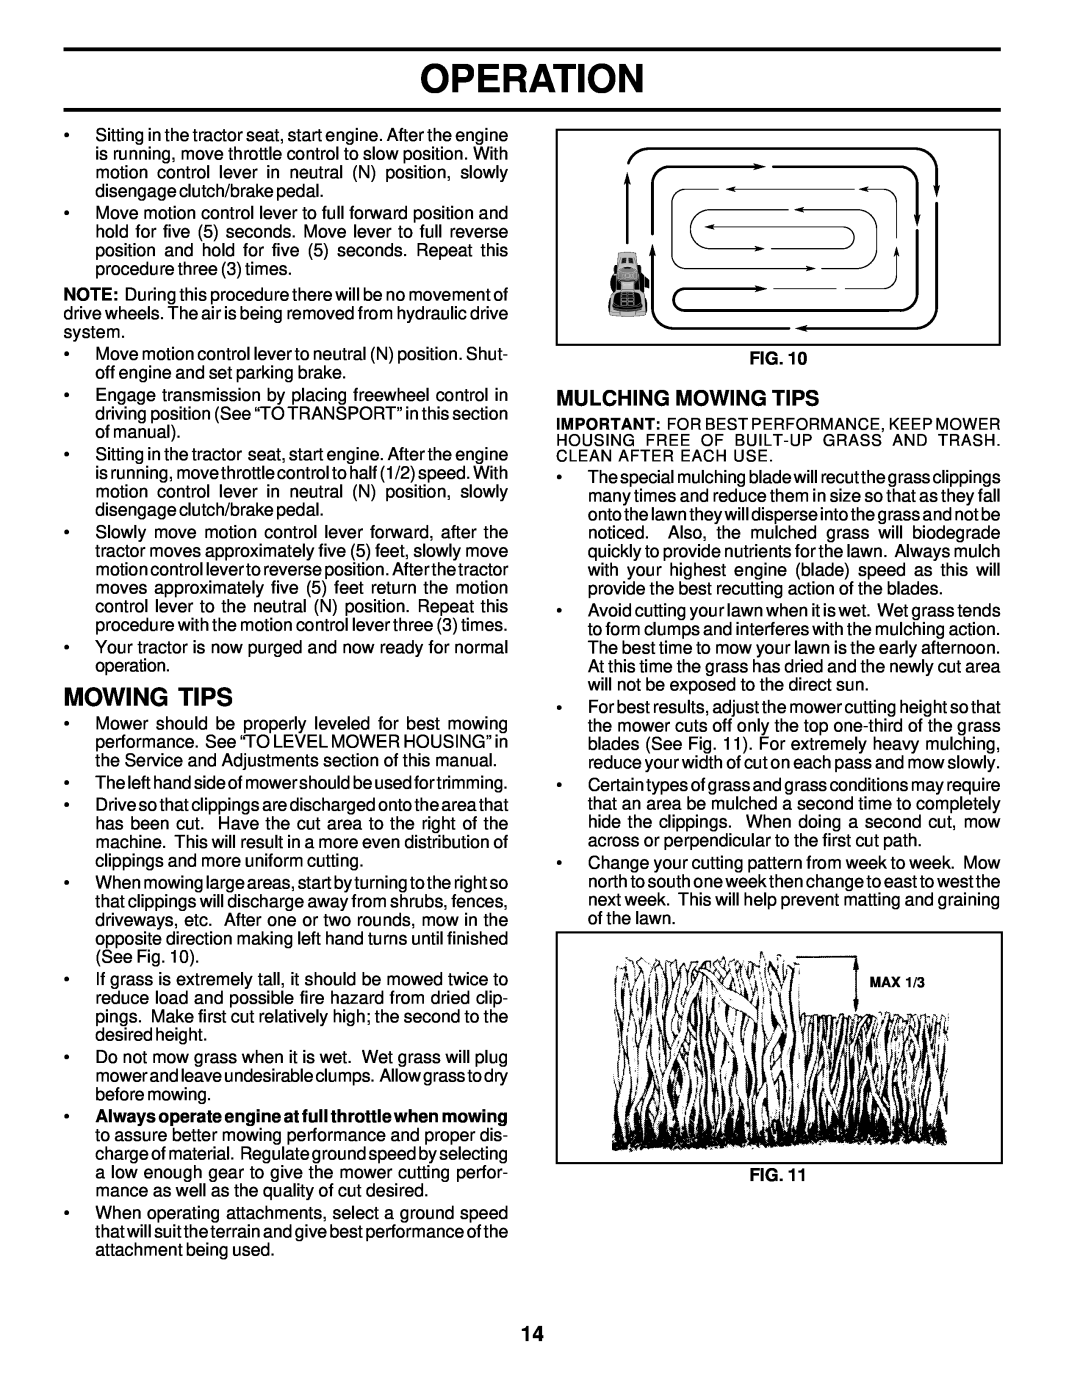 Poulan PRK17H42STB owner manual Mulching Mowing Tips, Operation 